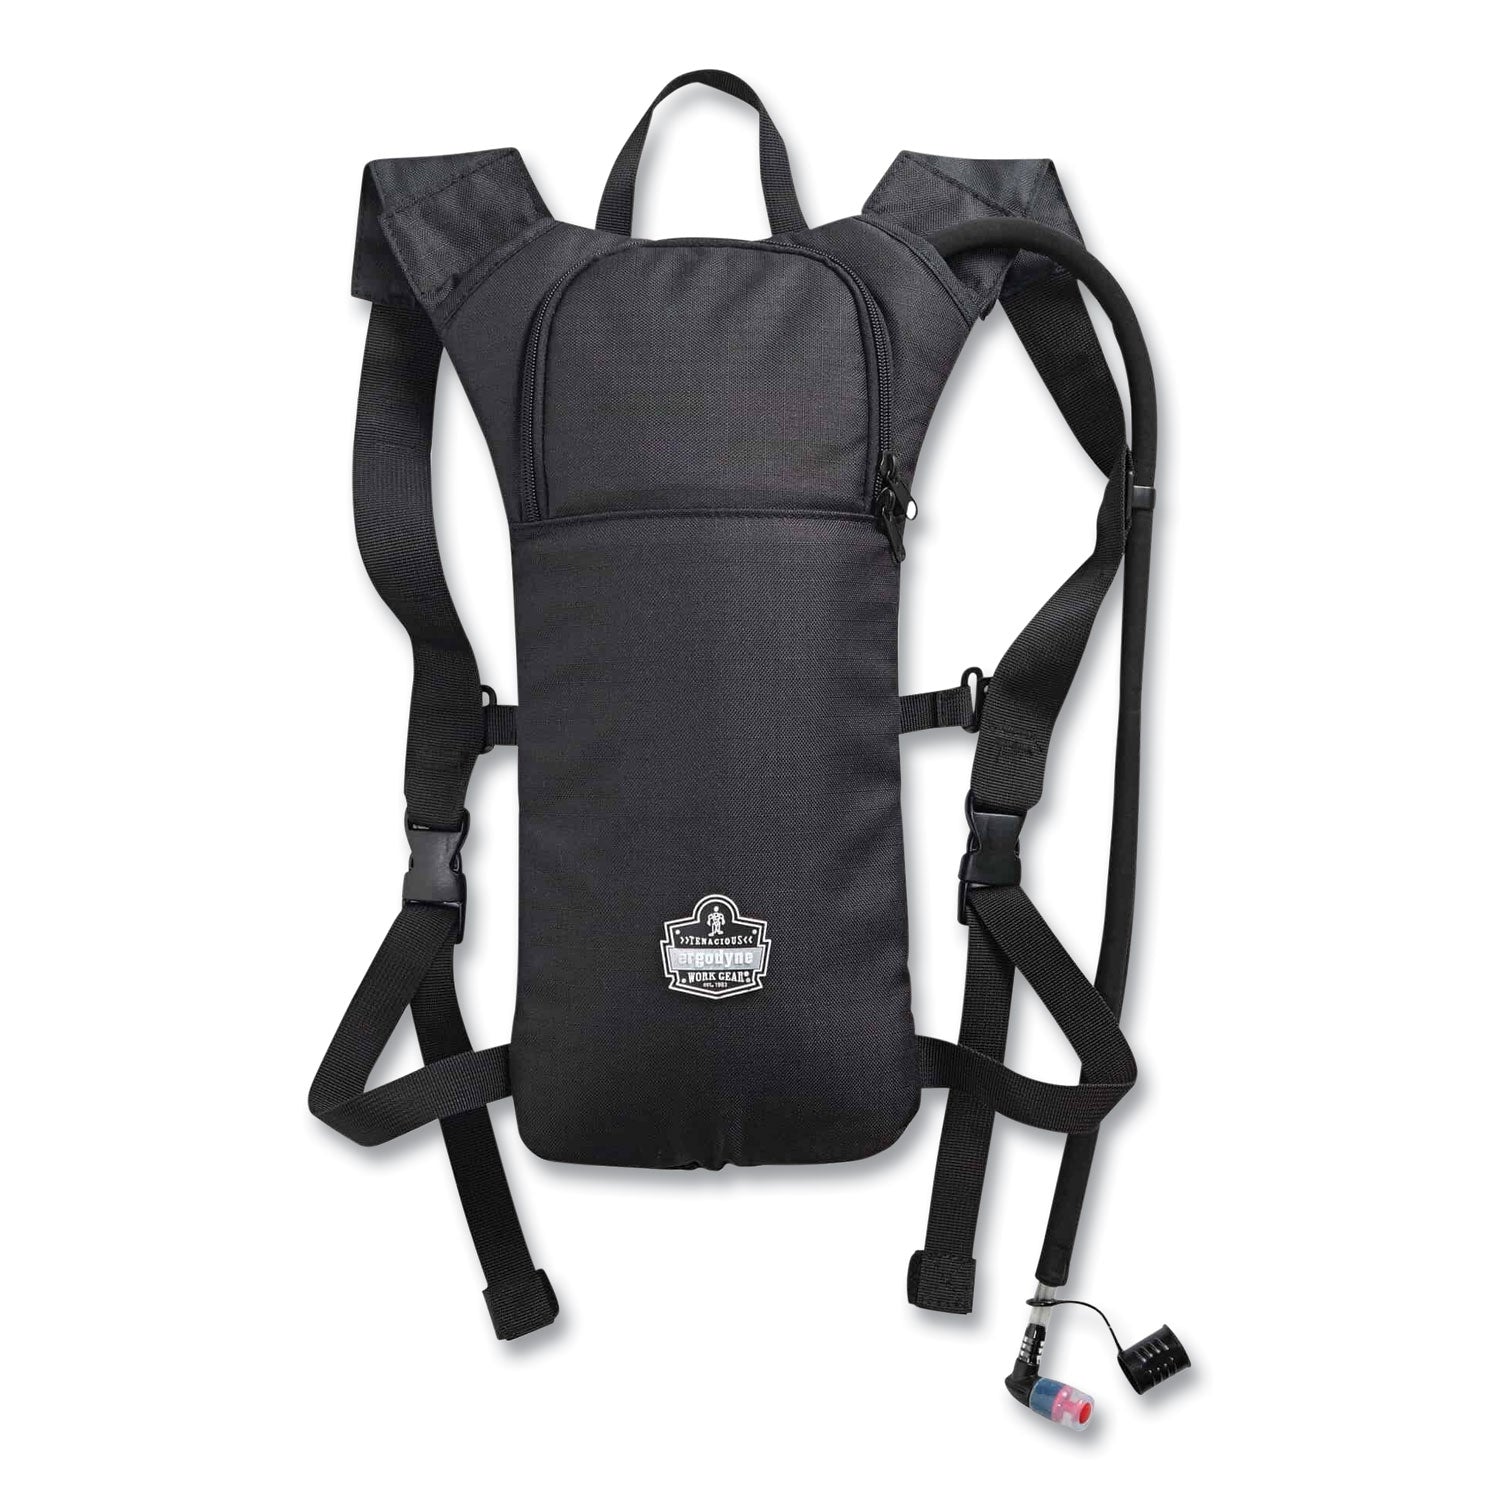 chill-its-5155-low-profile-hydration-pack-2-l-black-ships-in-1-3-business-days_ego13155 - 1